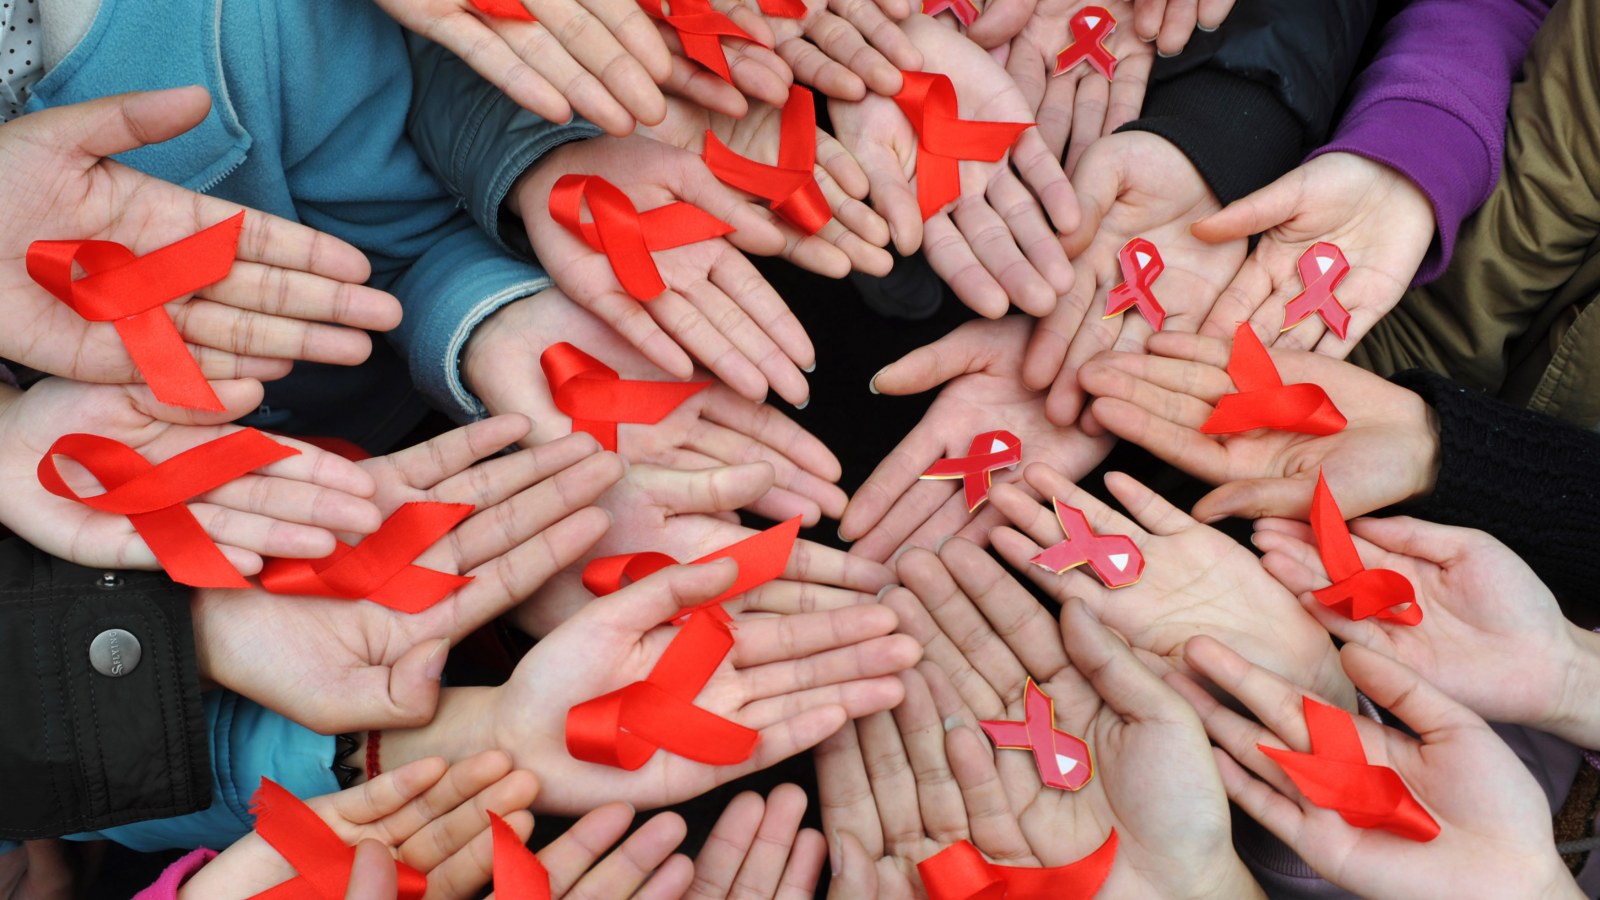 World AIDS Day: the Red Ribbon